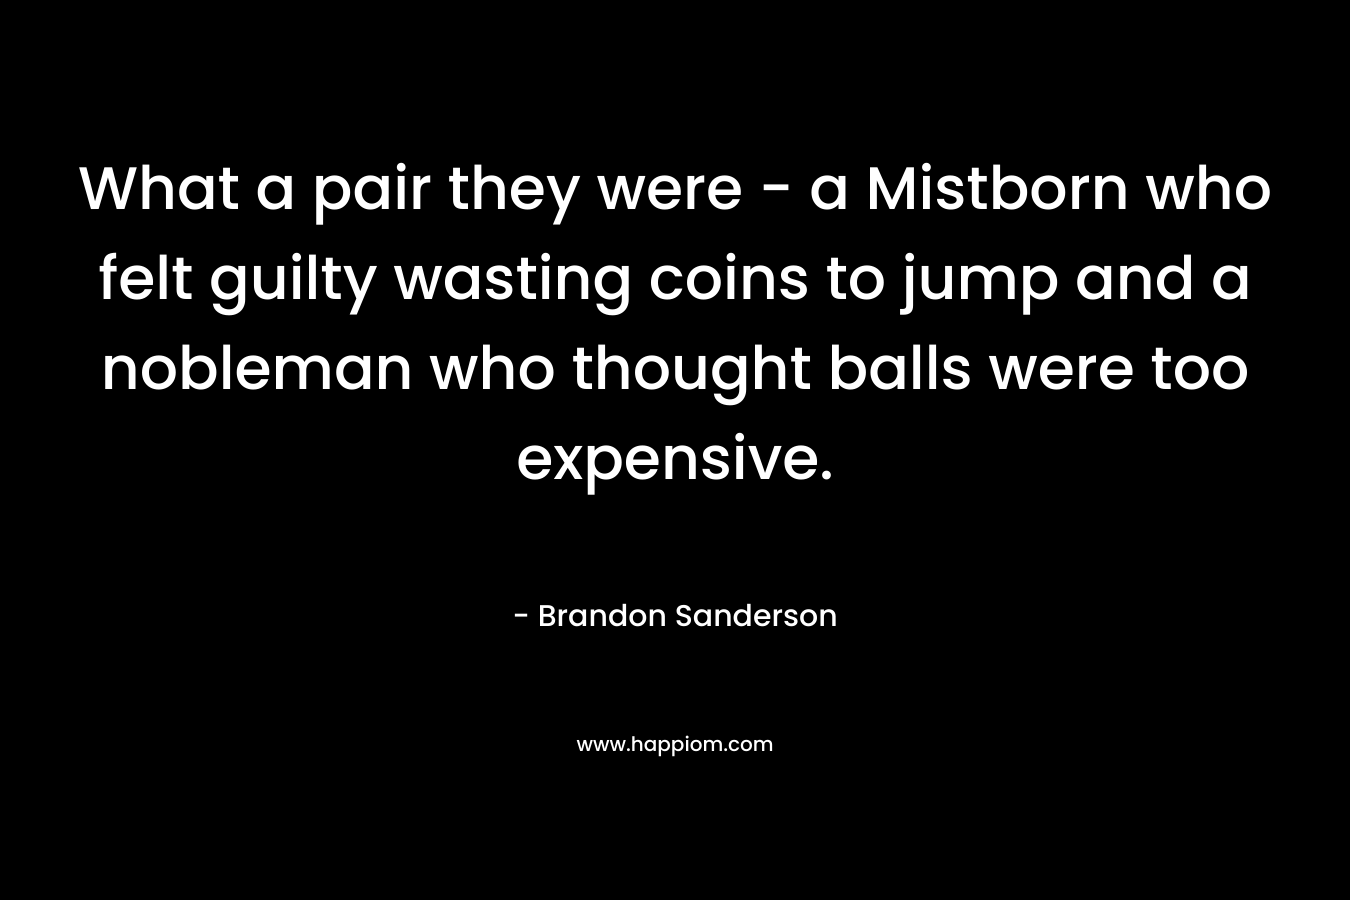 What a pair they were – a Mistborn who felt guilty wasting coins to jump and a nobleman who thought balls were too expensive. – Brandon Sanderson